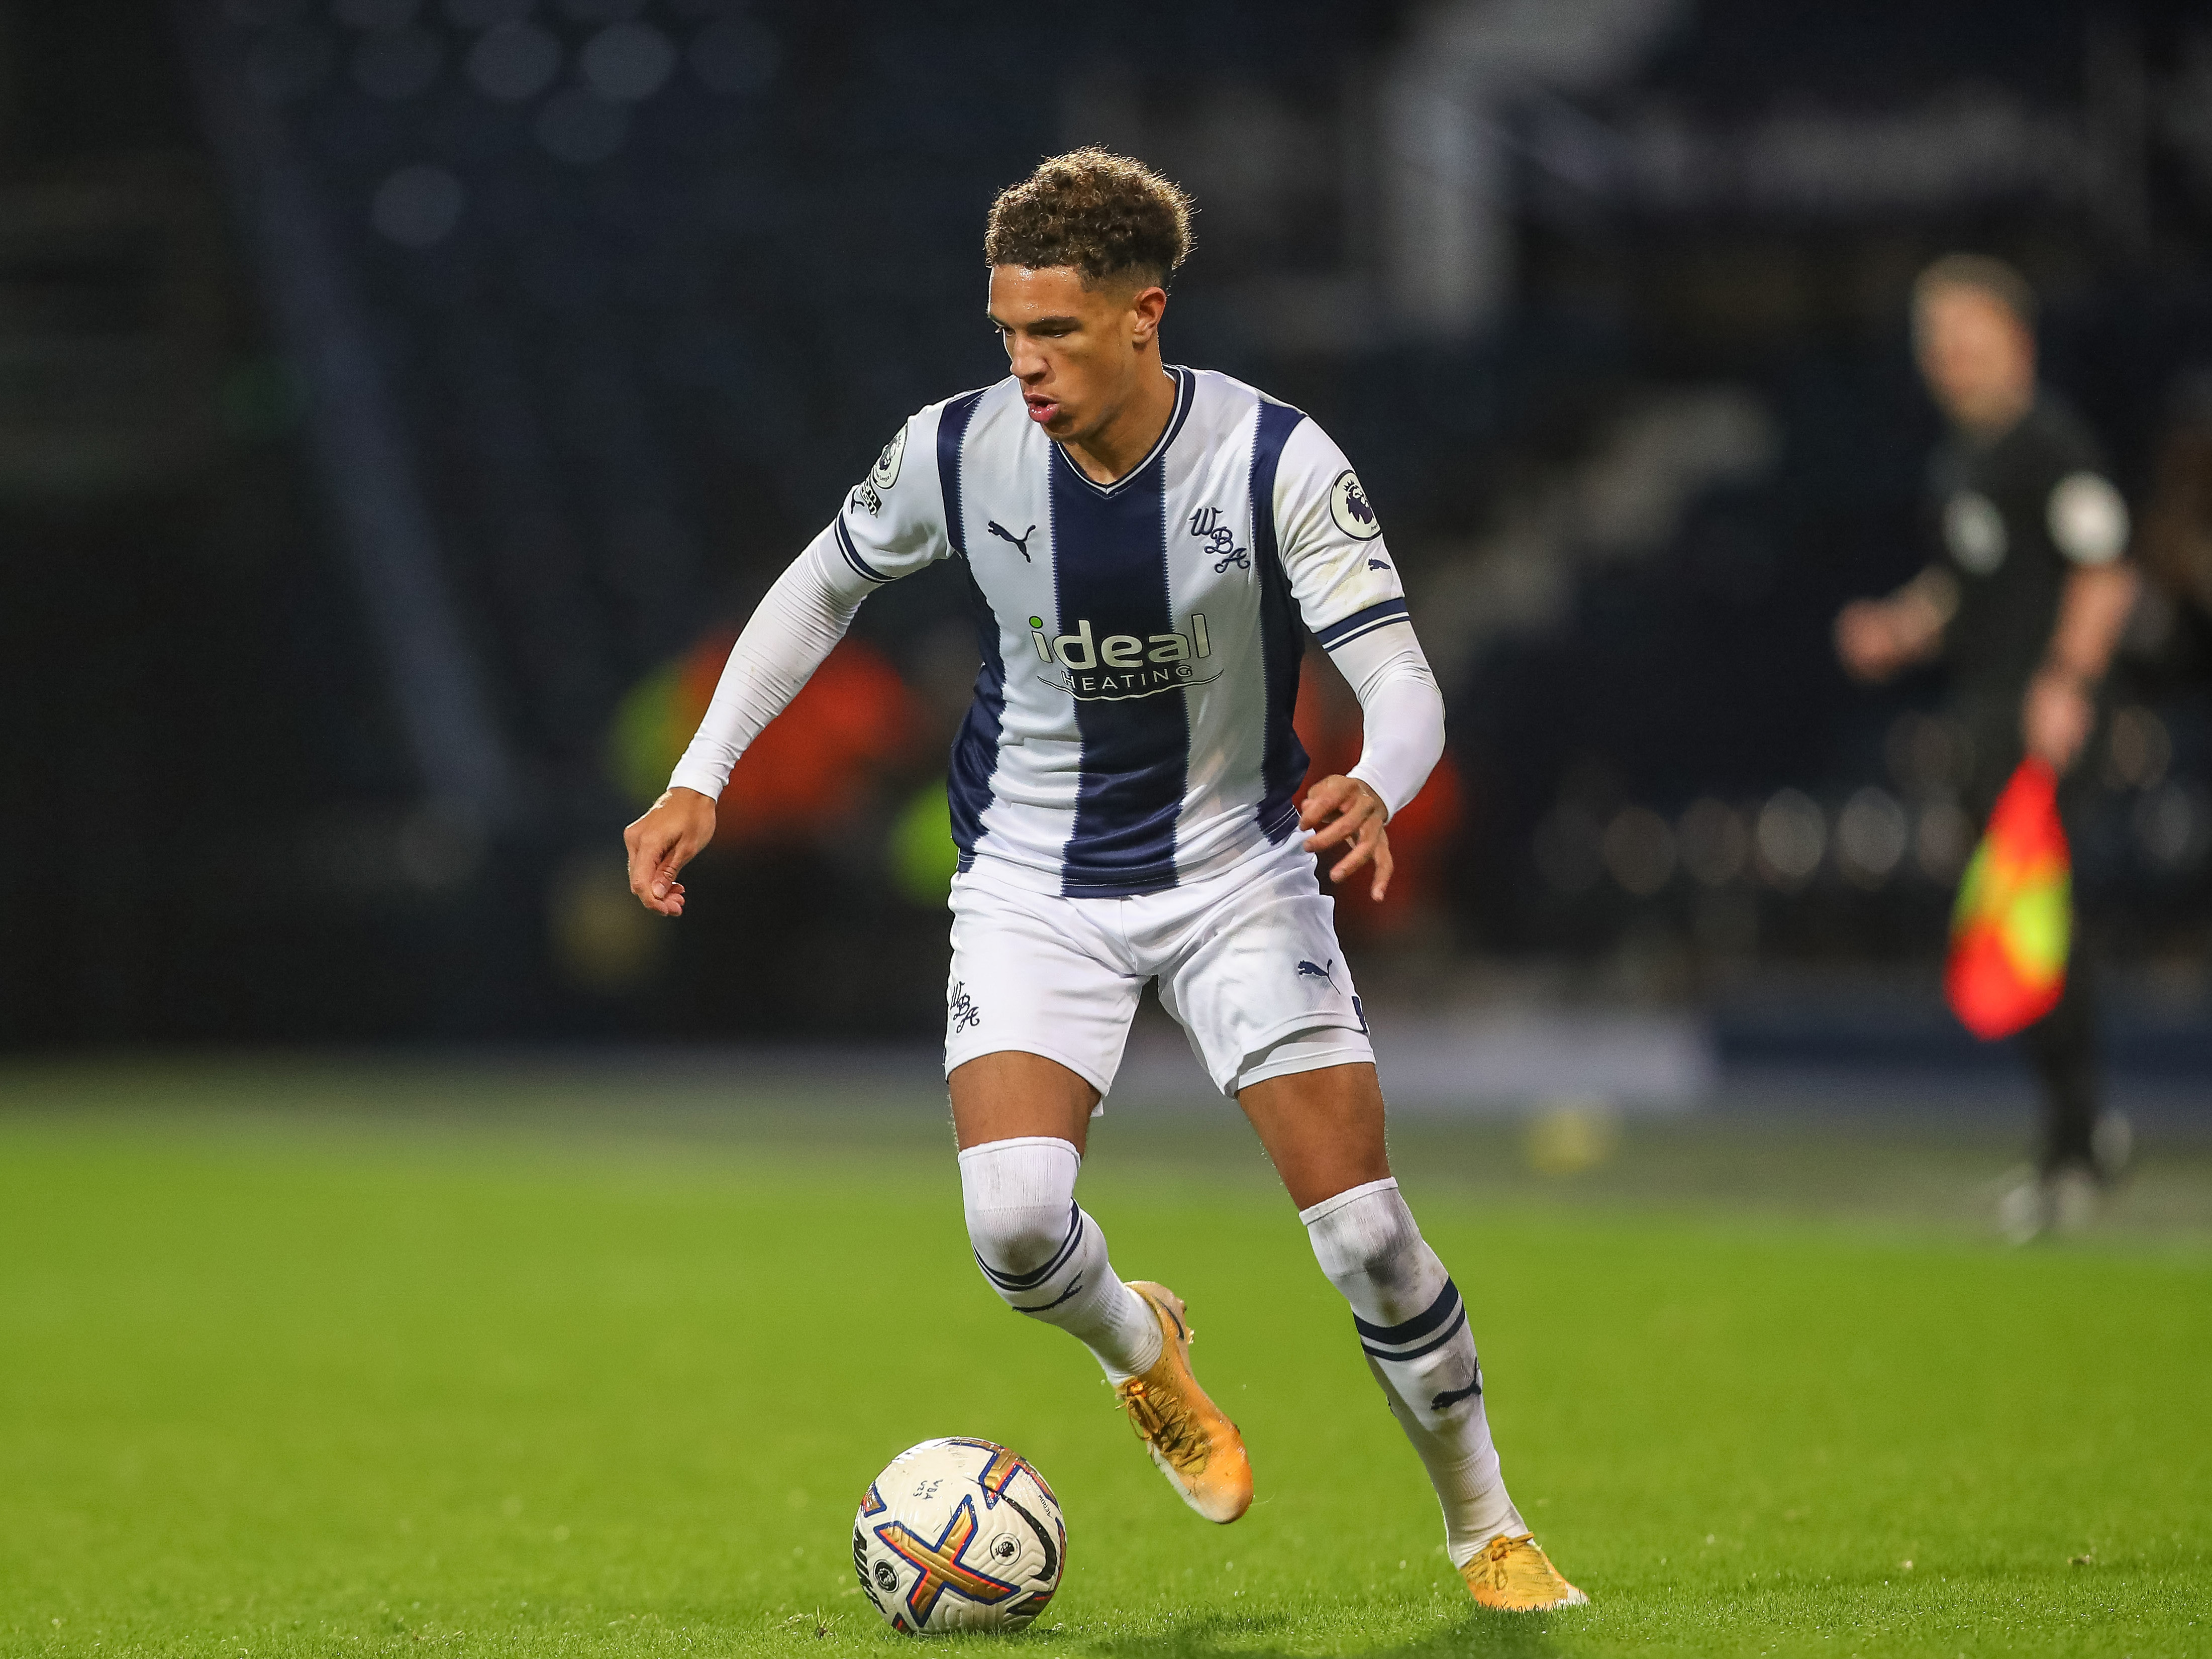 Ethan Ingram runs with the ball during Albion's PL2 match against Nottingham Forest at The Hawthorns